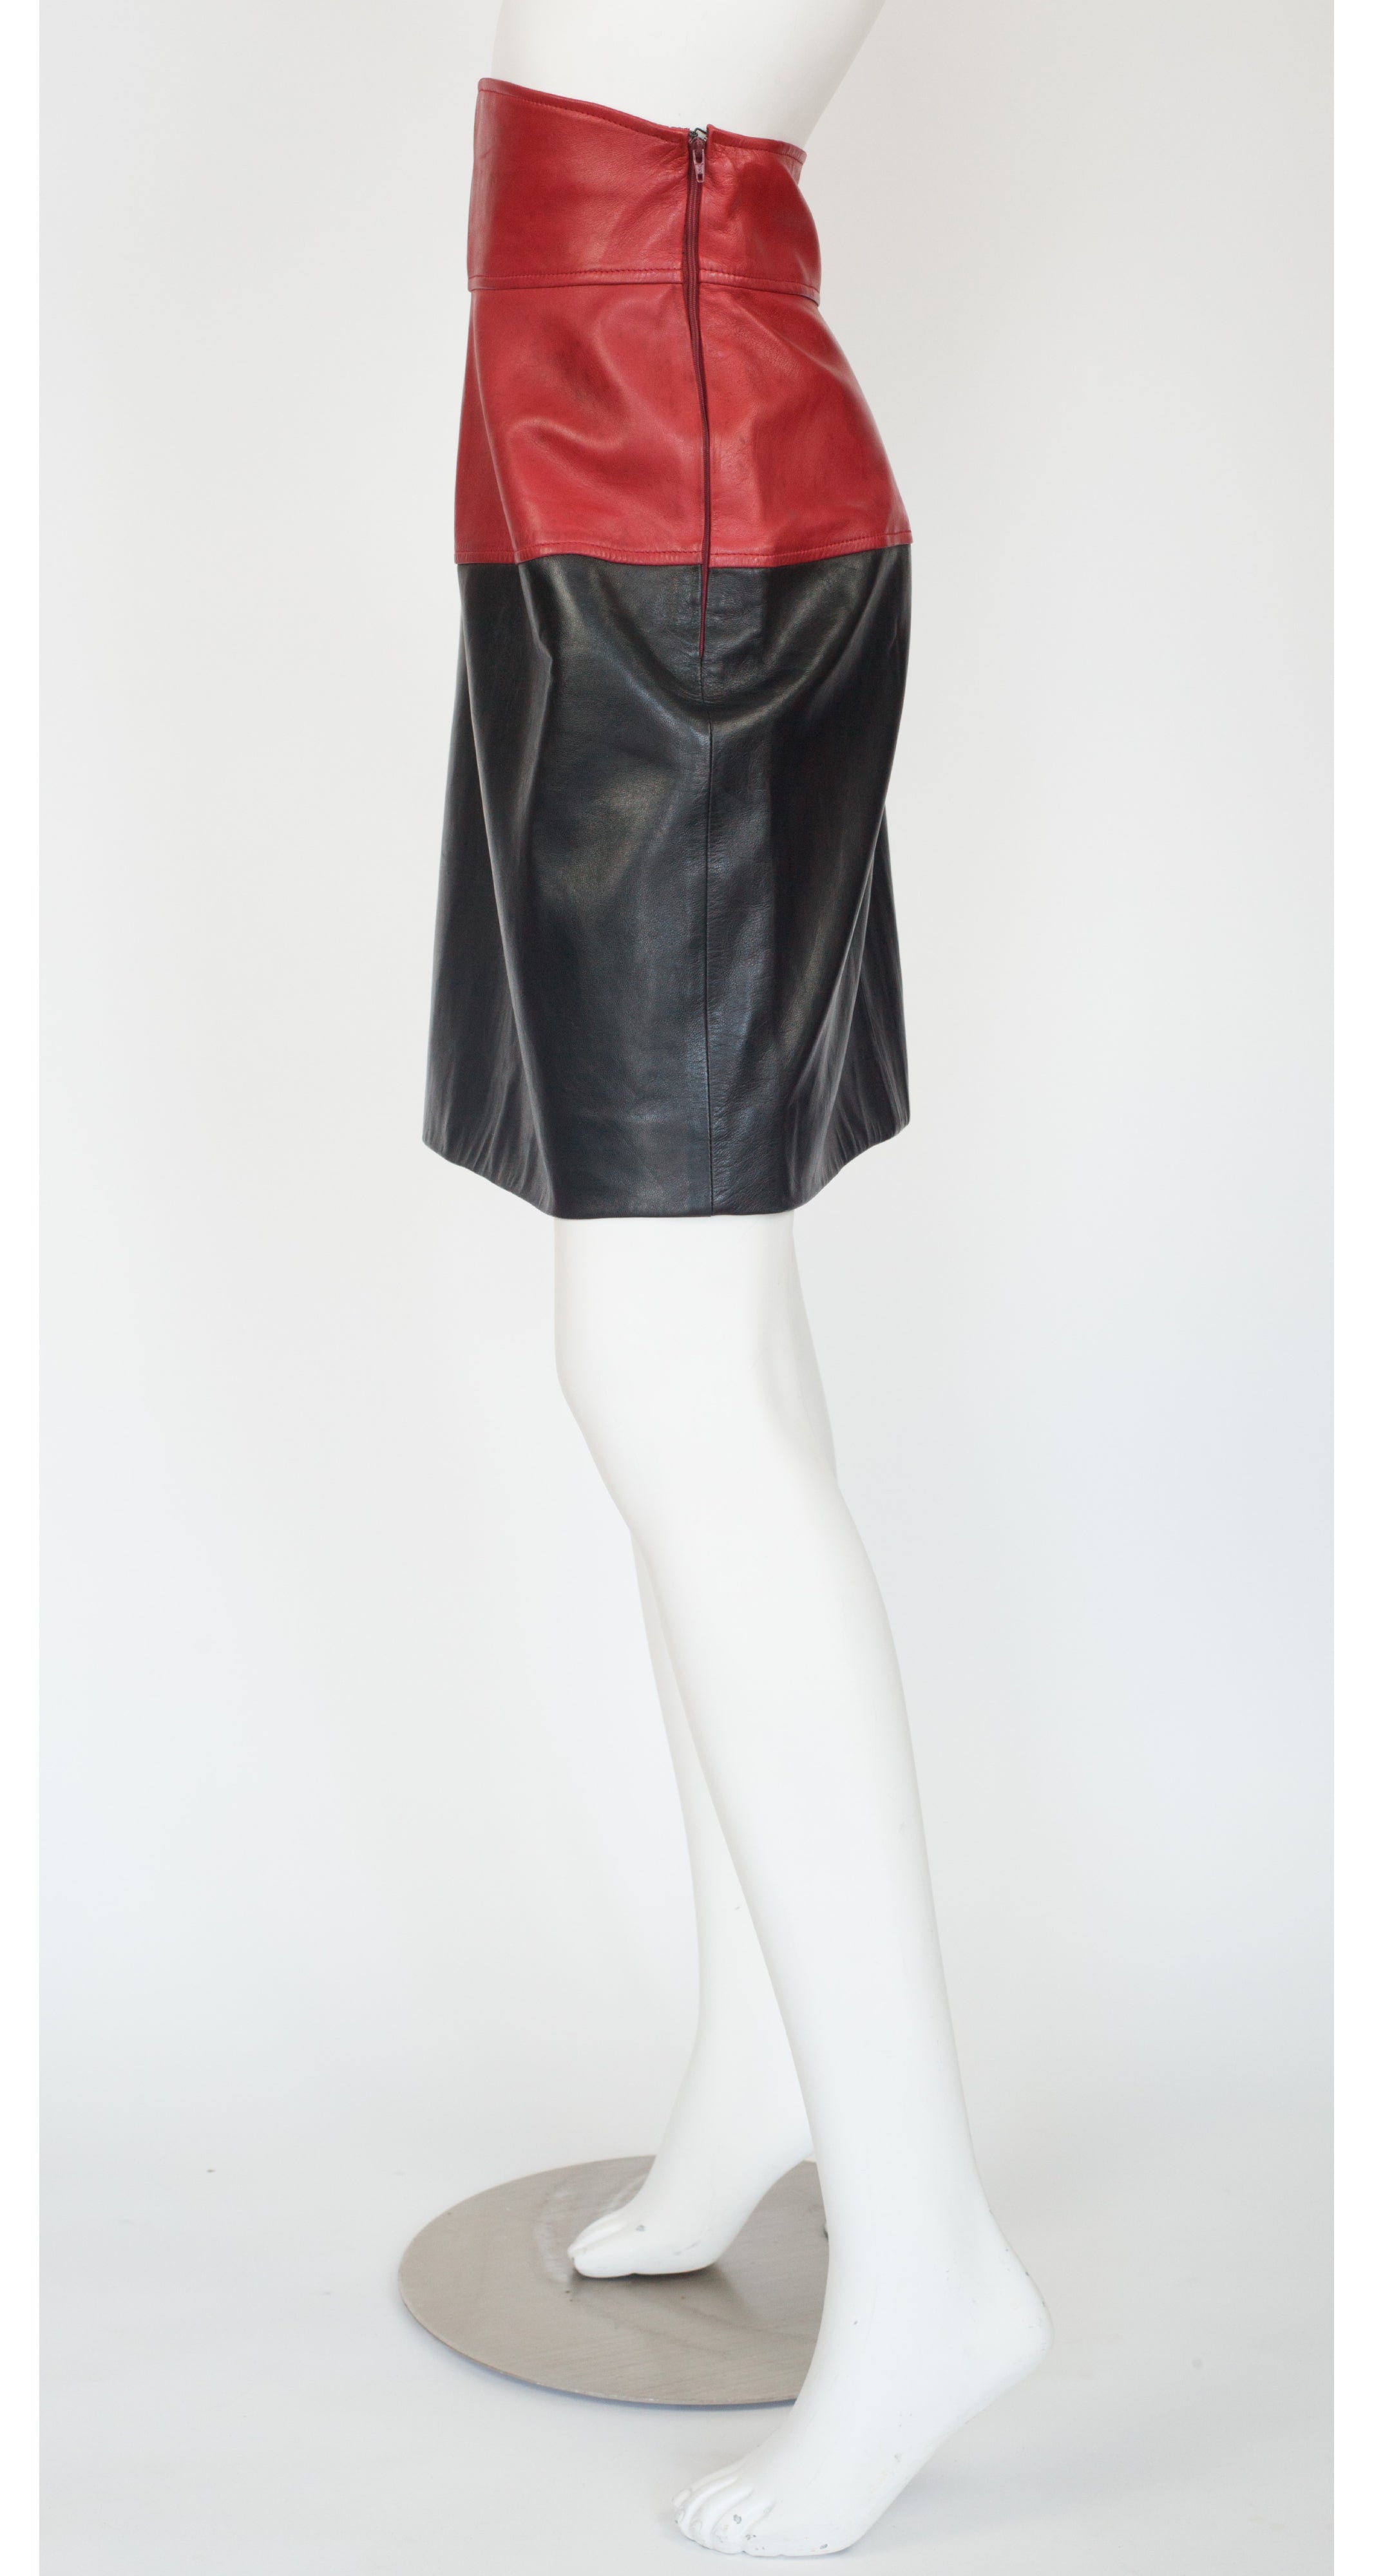 1983-84 F/W Runway Red & Black Leather High-Waisted Skirt